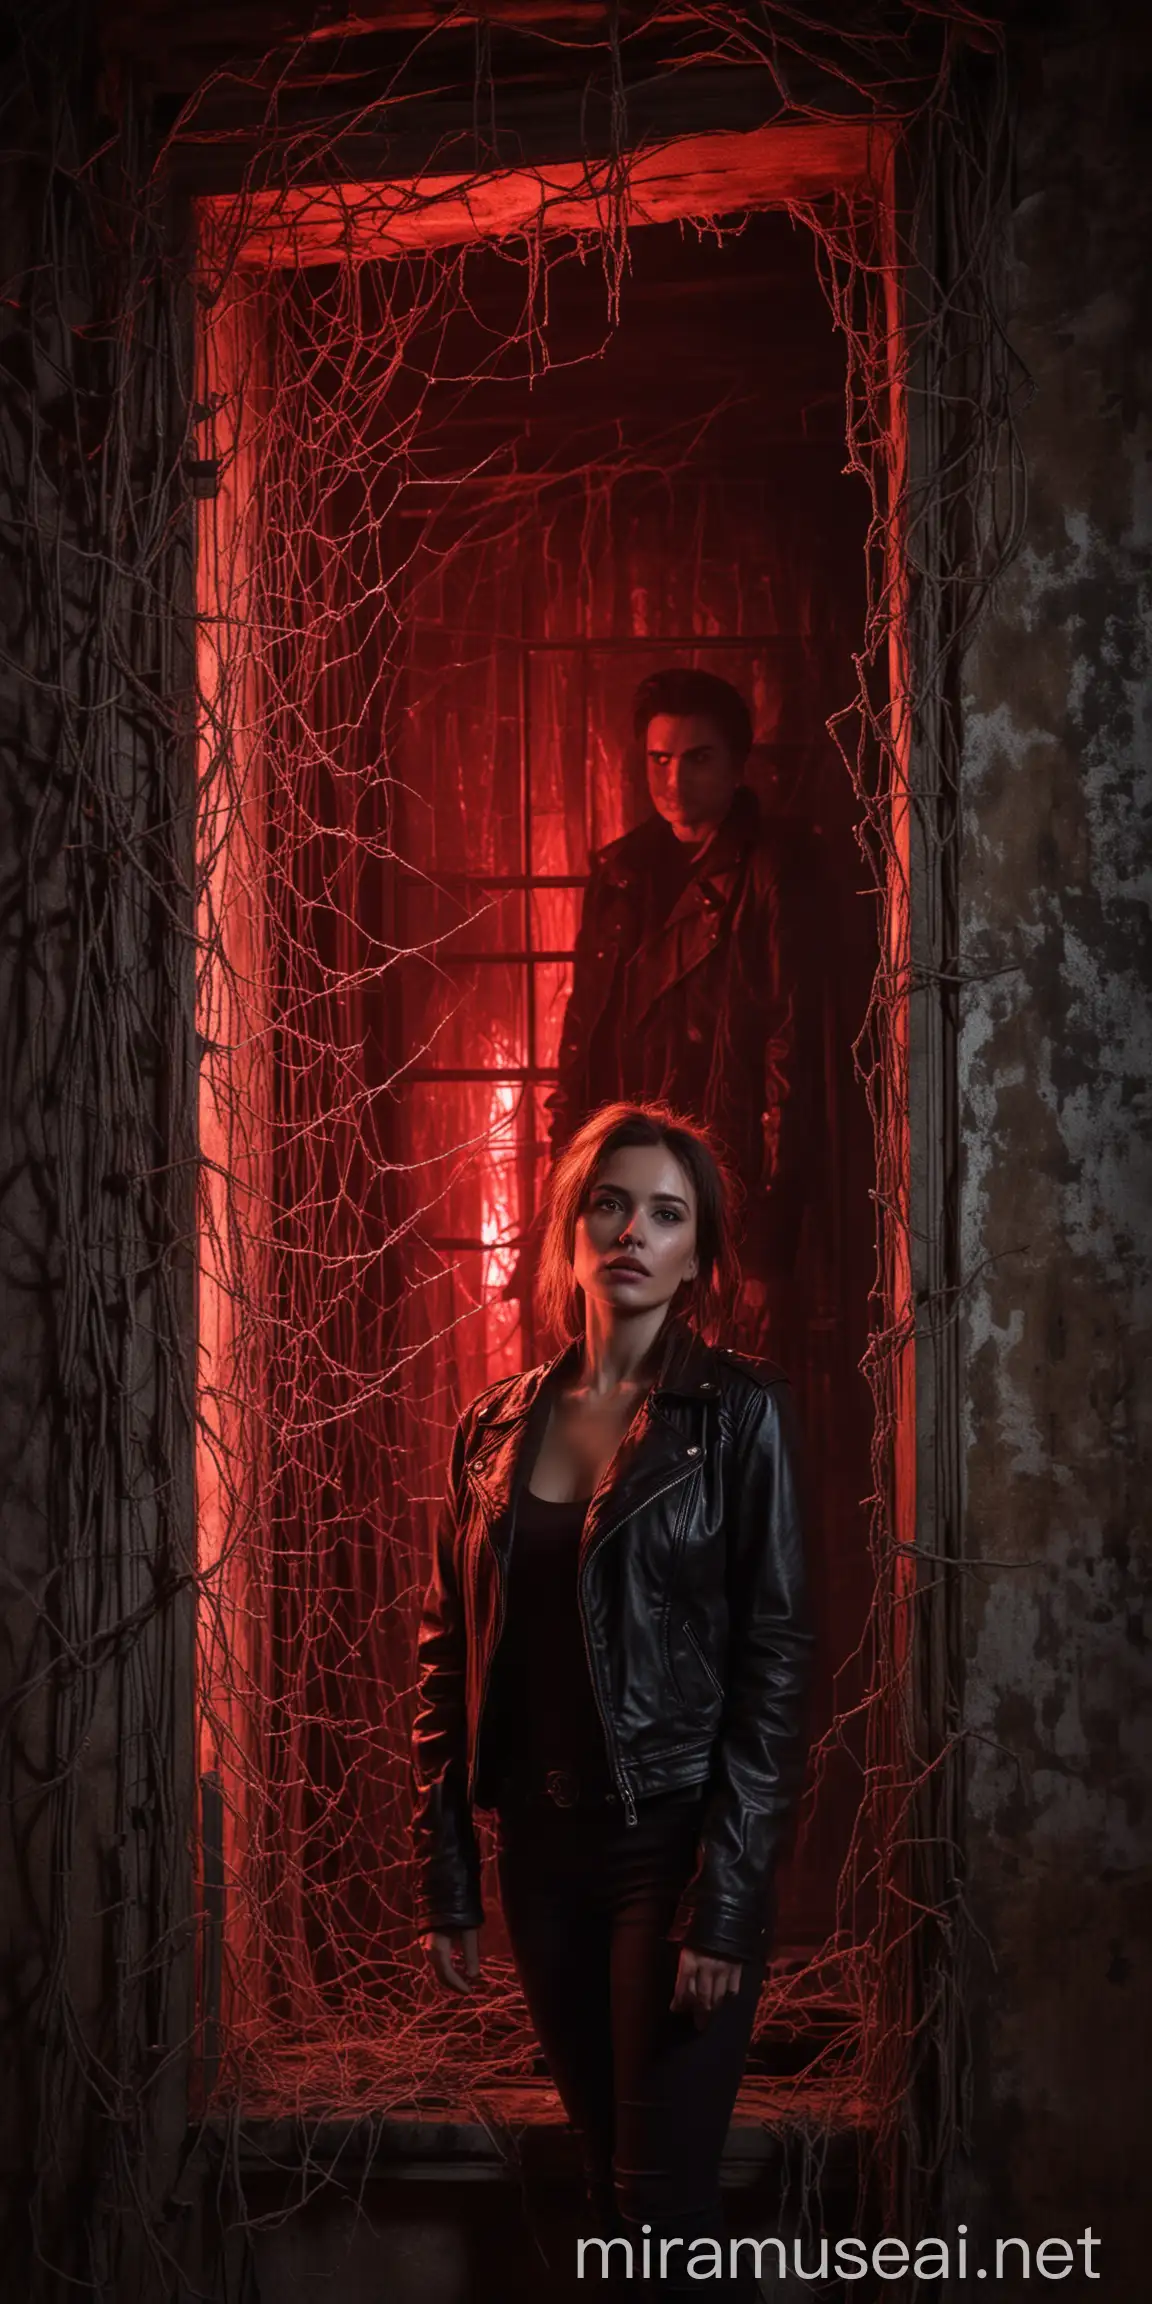 A beautiful lady in a leather jacket, looking out from a scary house with cobwebs and red luminous light behind, with a strange man shadow behind